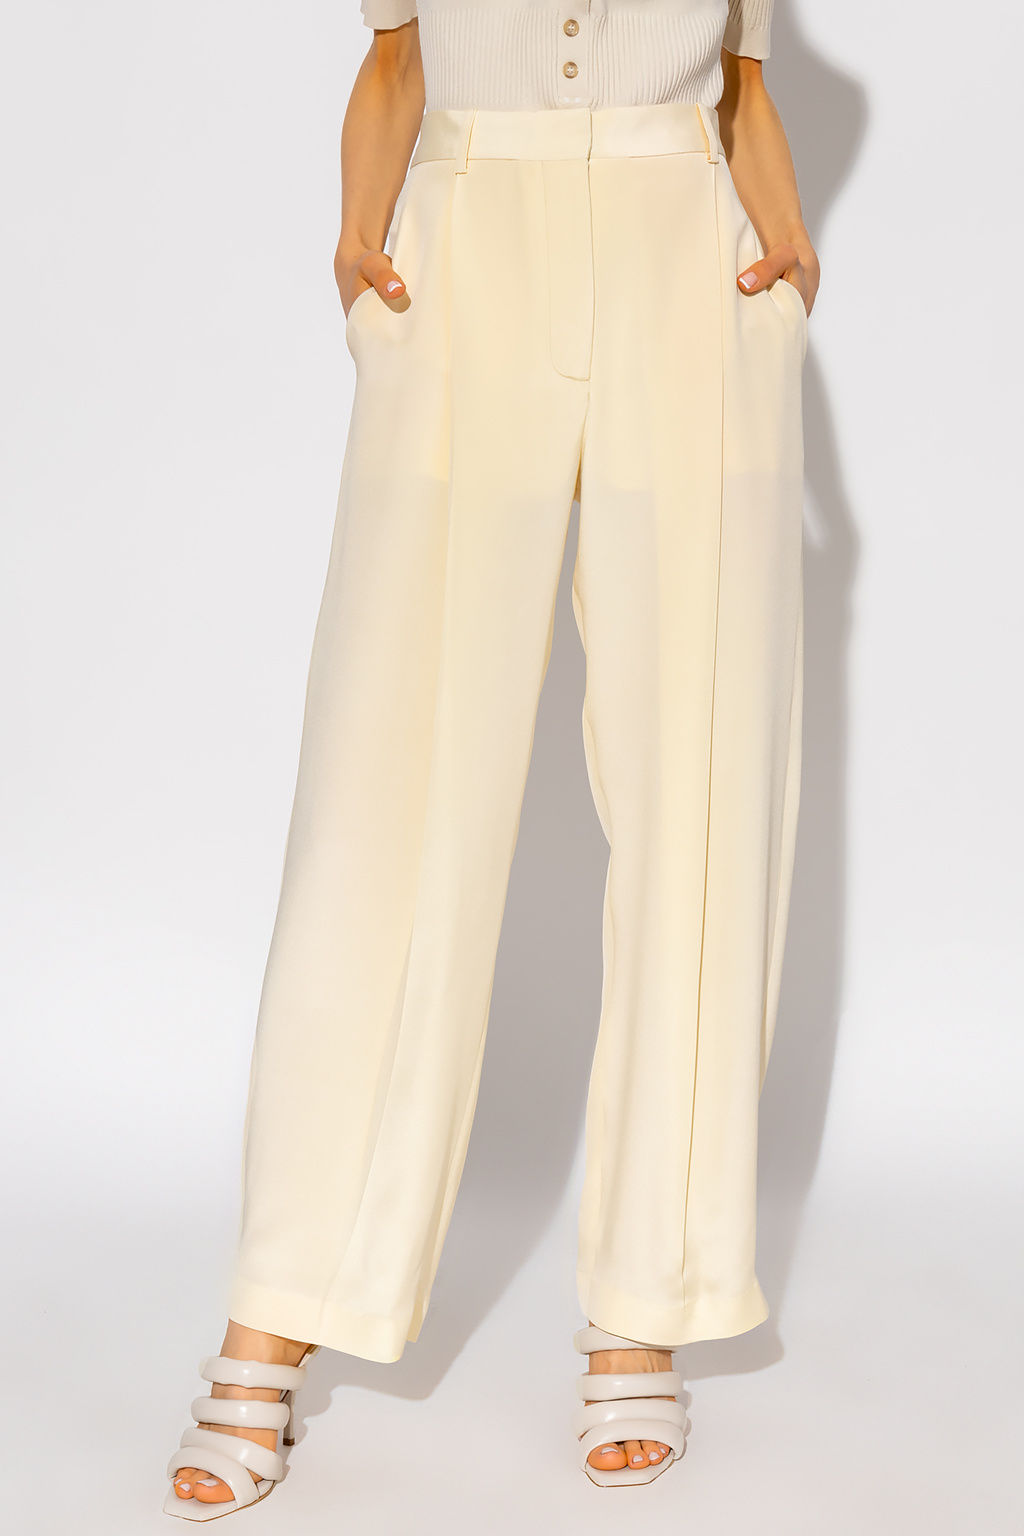 Victoria Beckham Pleated silk Accelerate trousers